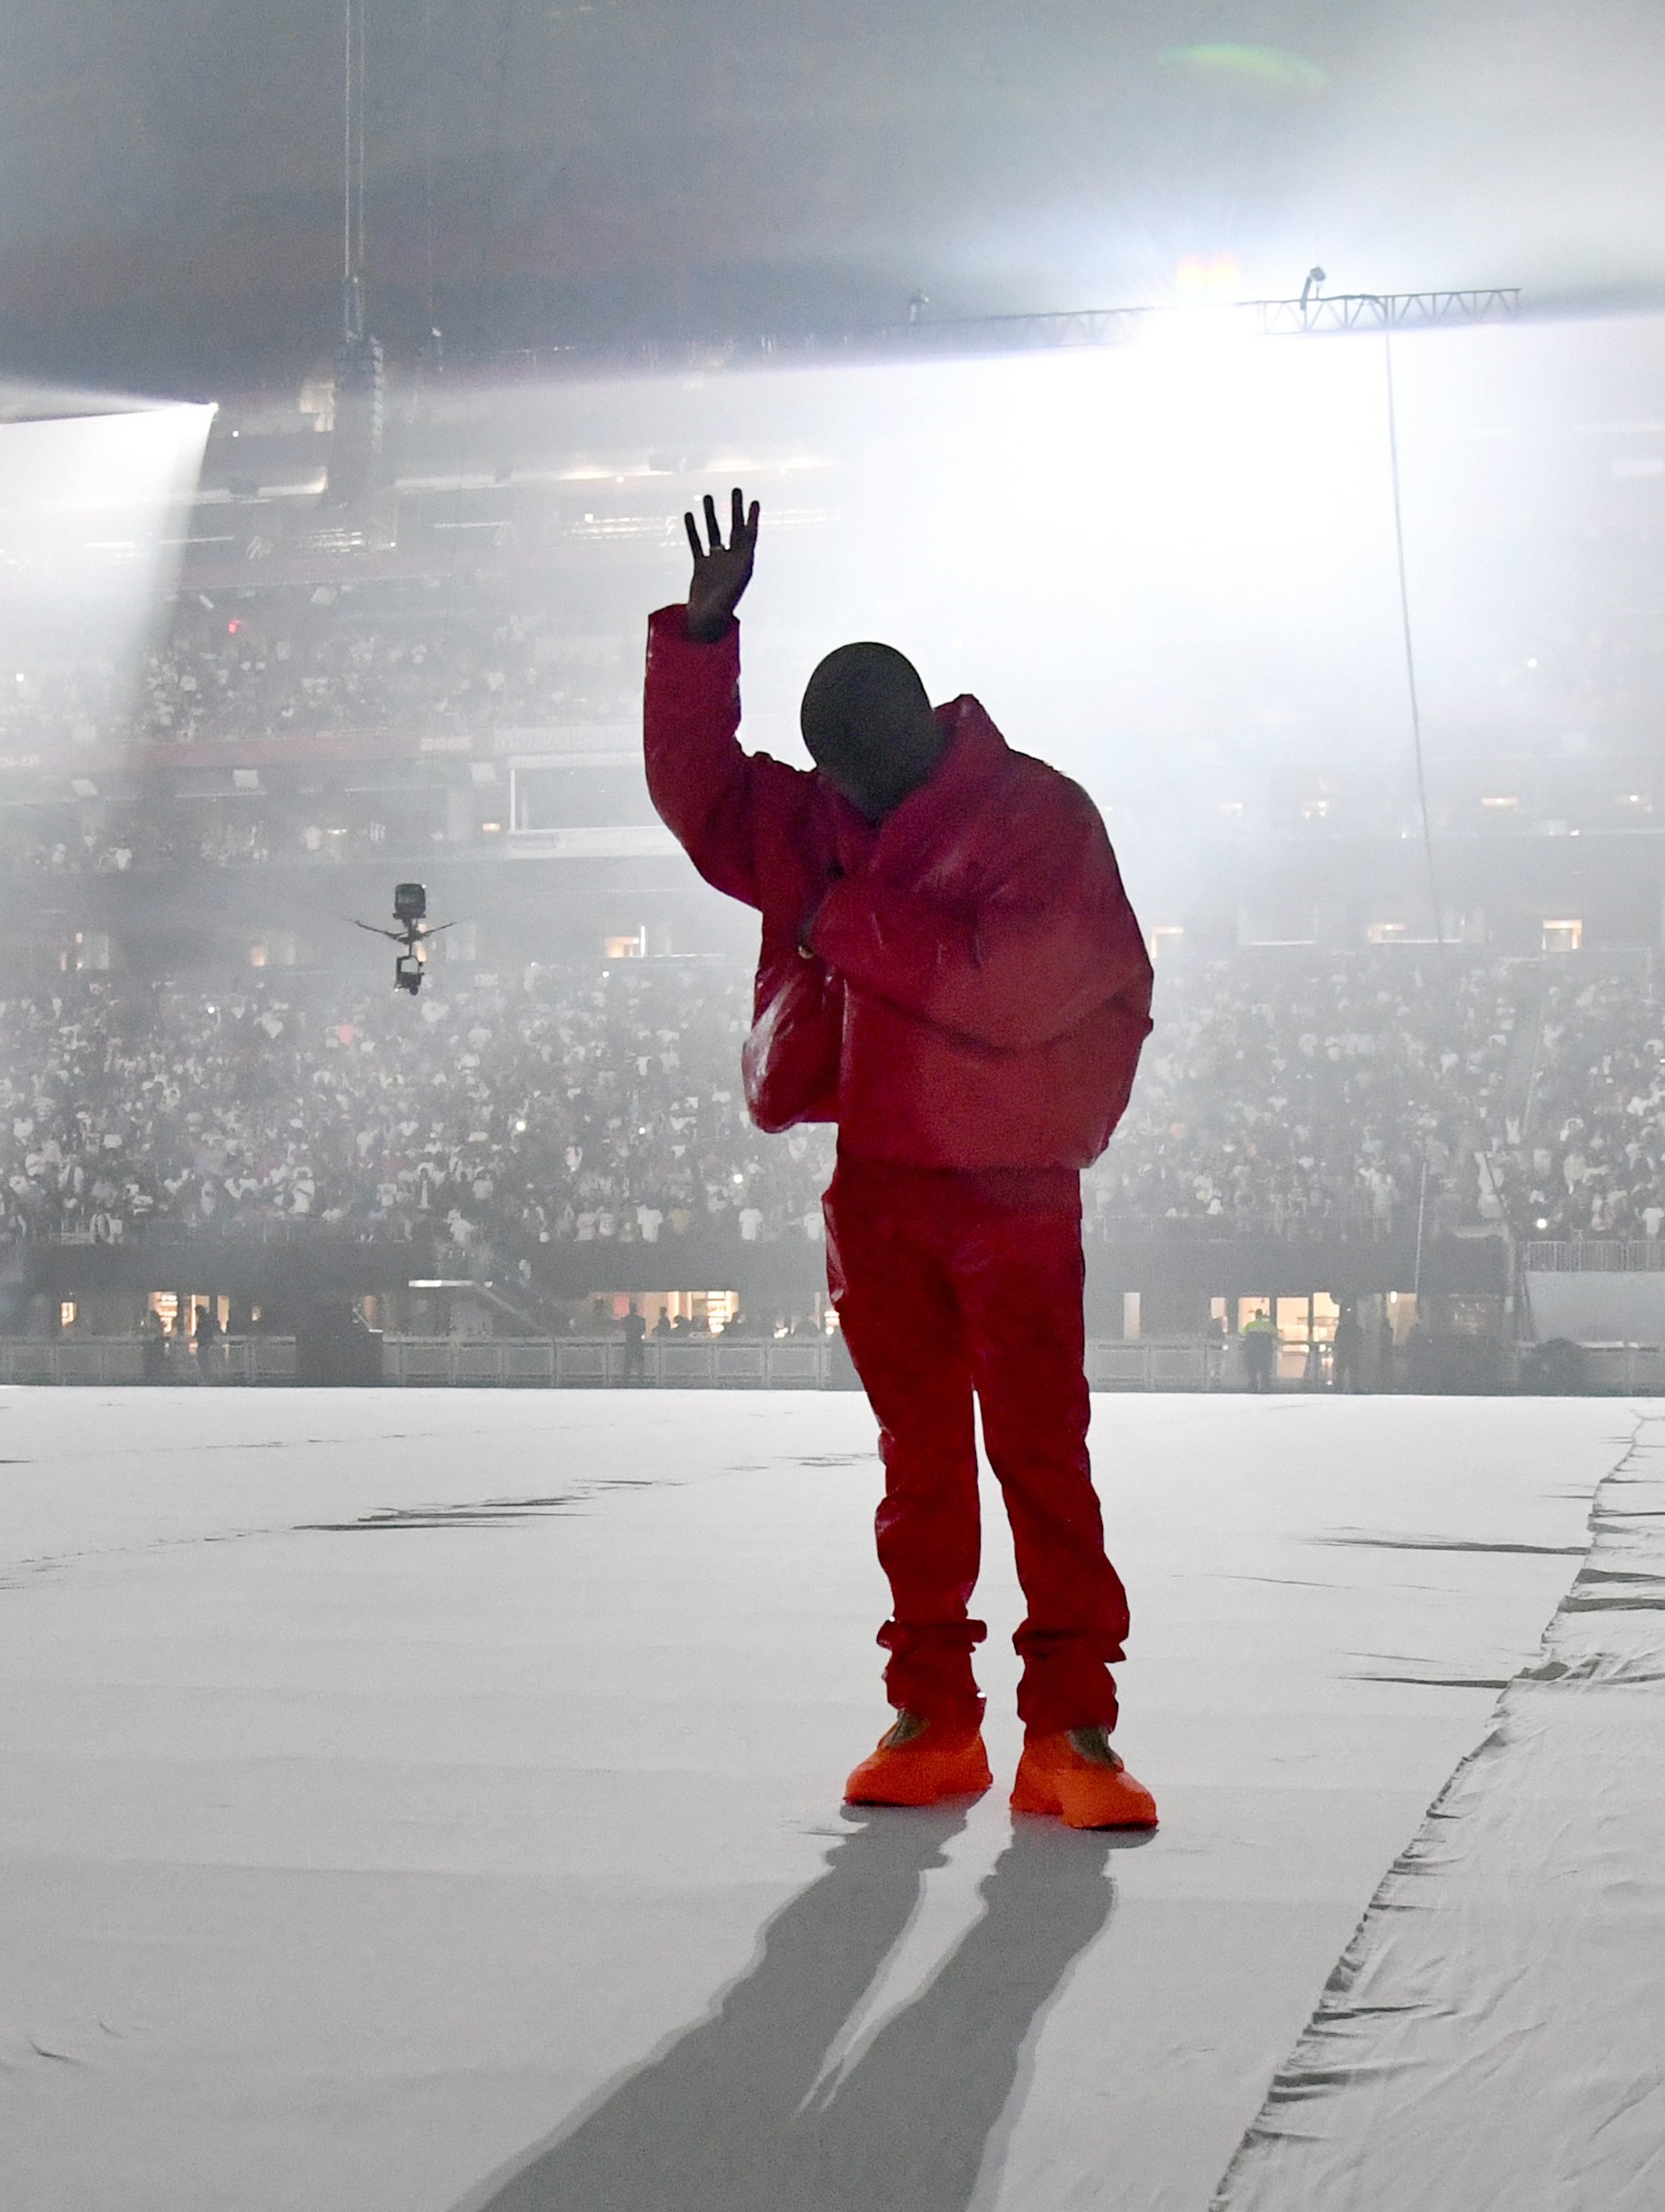 Kanye West Introduces 'Donda' to the World, With Creative